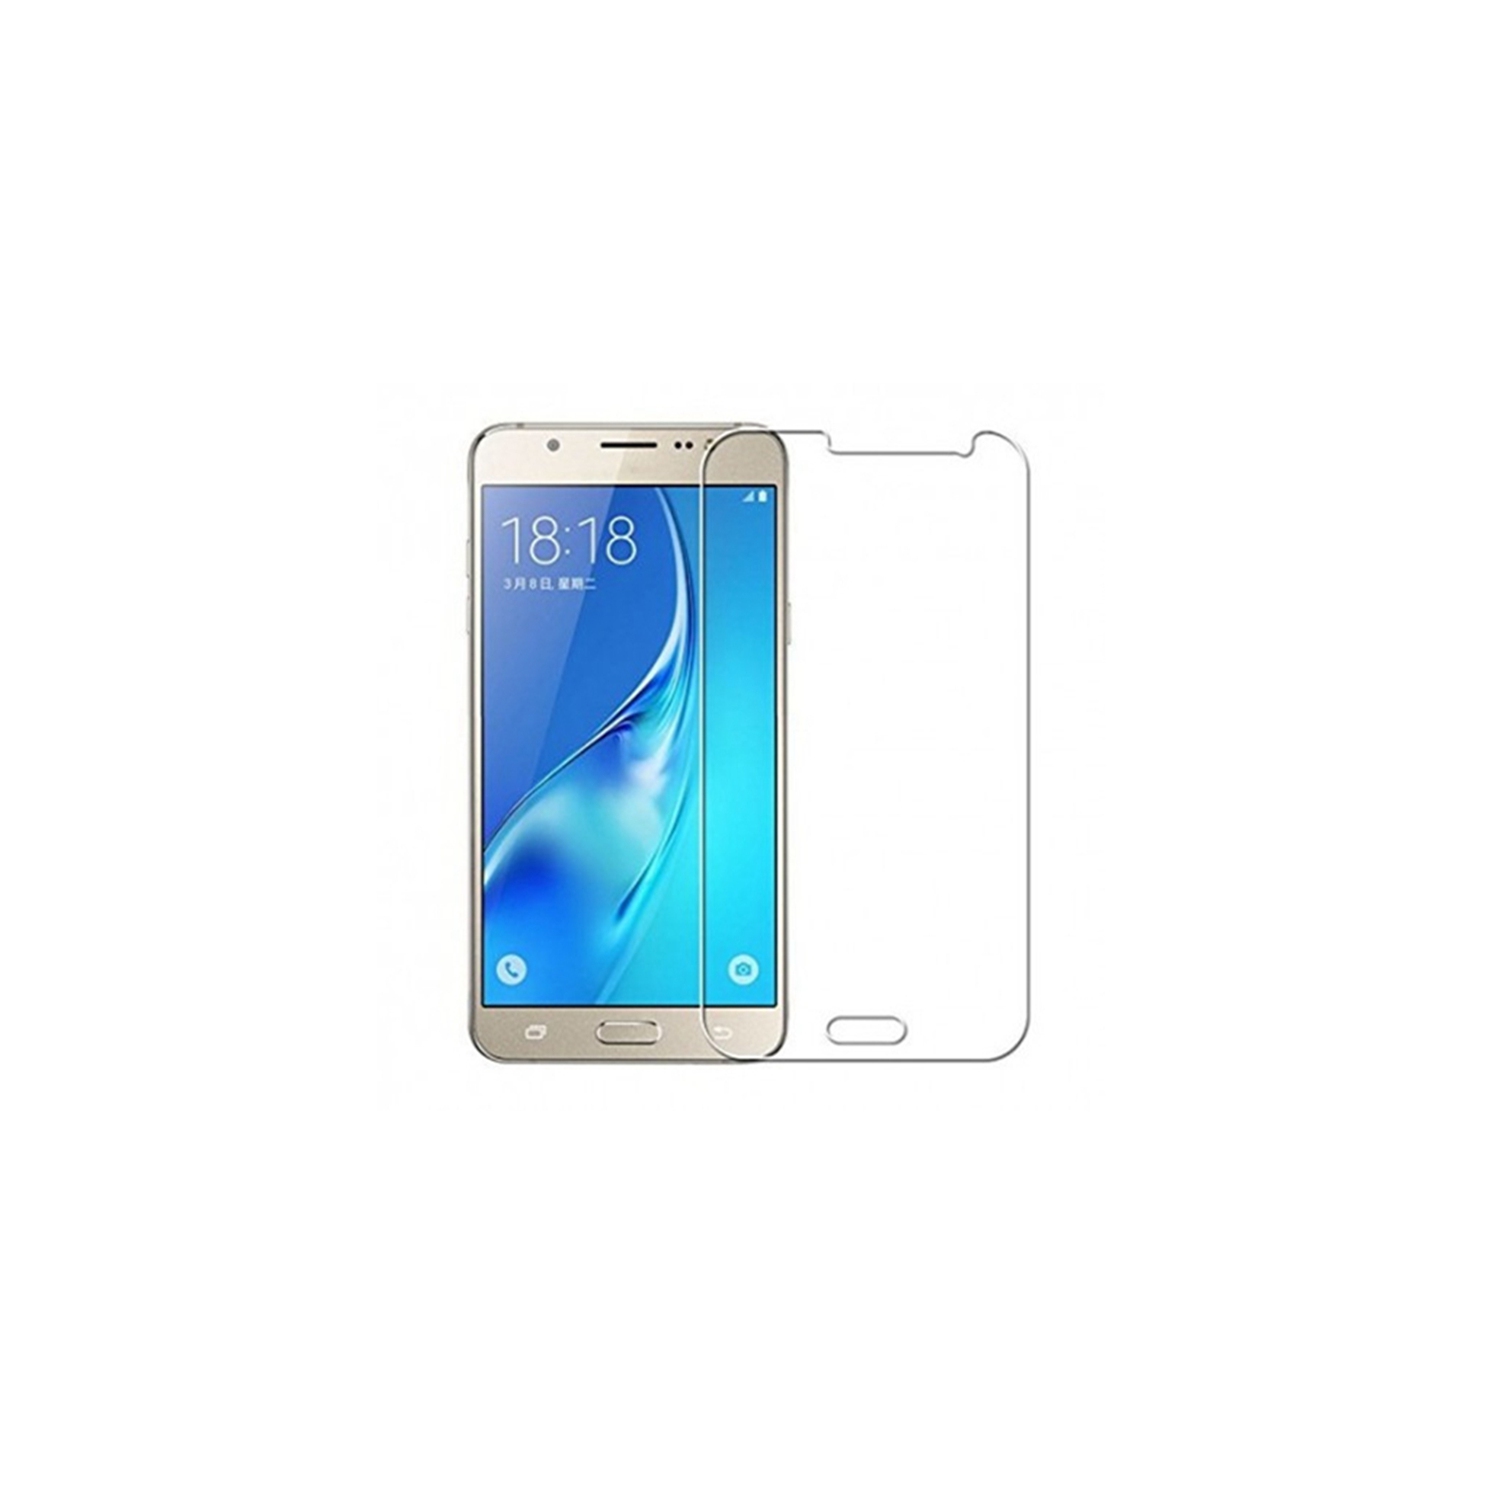 【2 Packs】 CSmart Premium Tempered Glass Screen Protector for Samsung Grand Prime G530, Case Friendly & Bubble Free